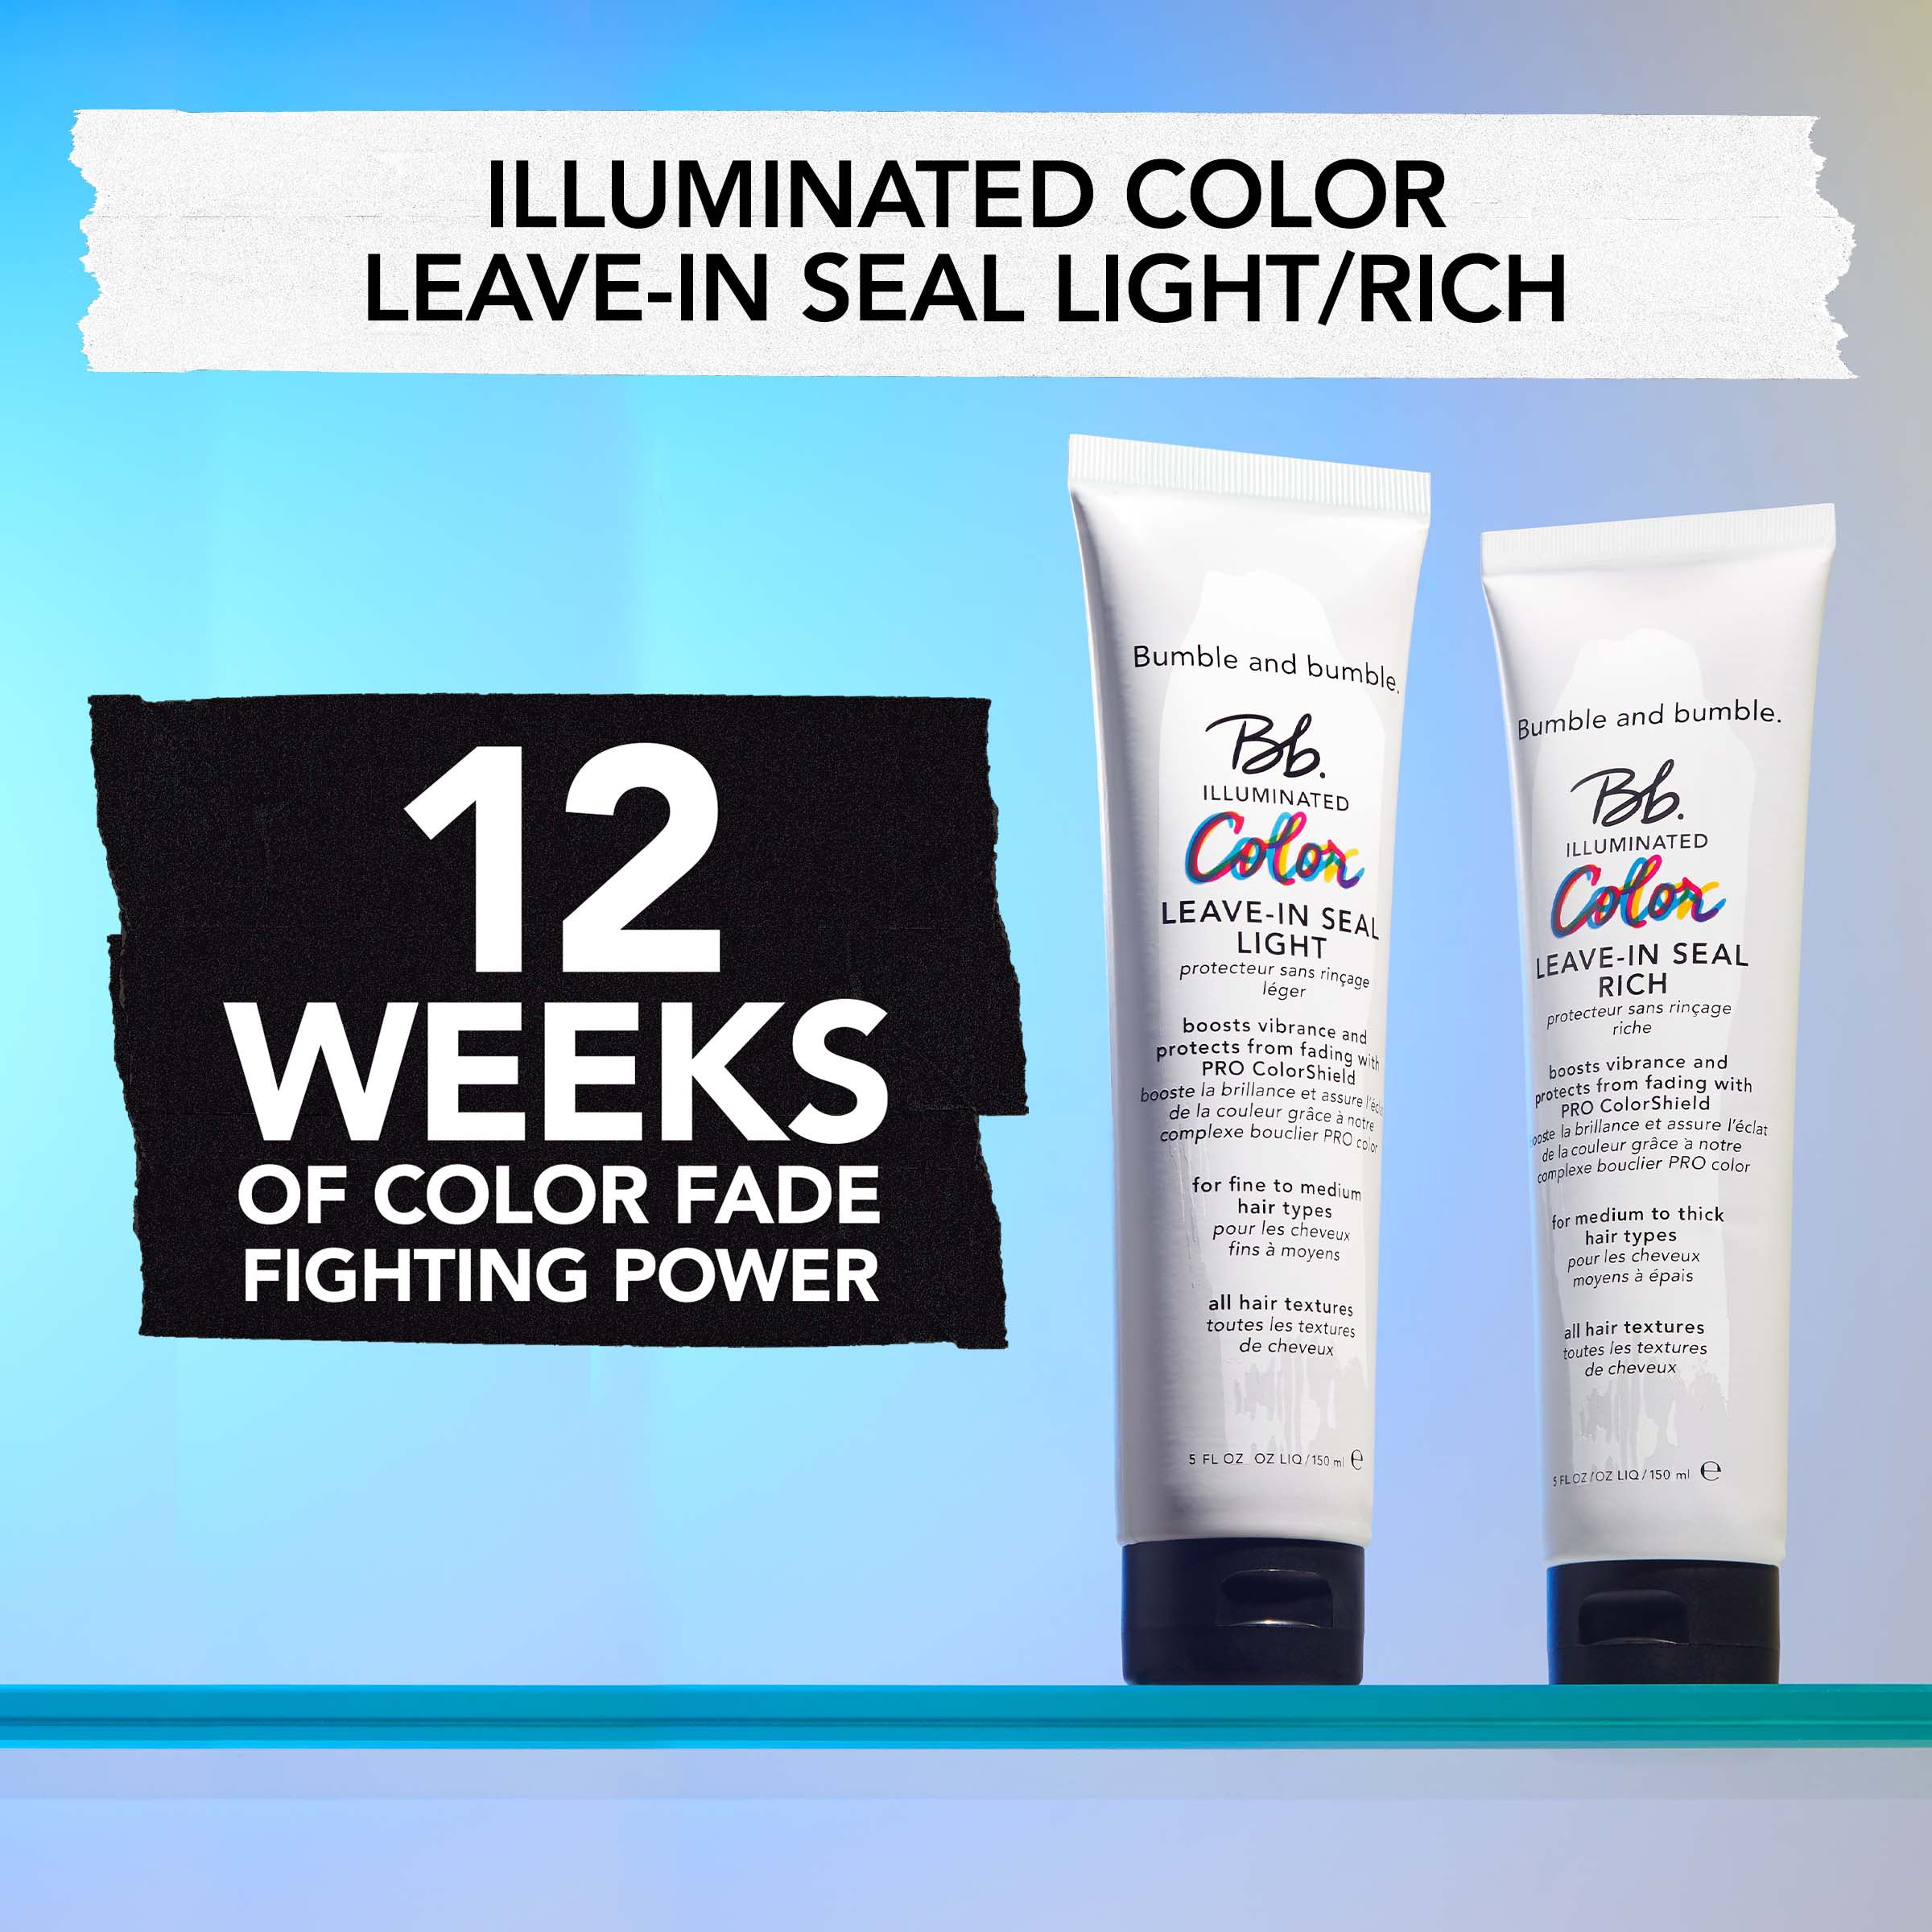 Bumble and Bumble Illuminated Colour Leave-in Seal Rich